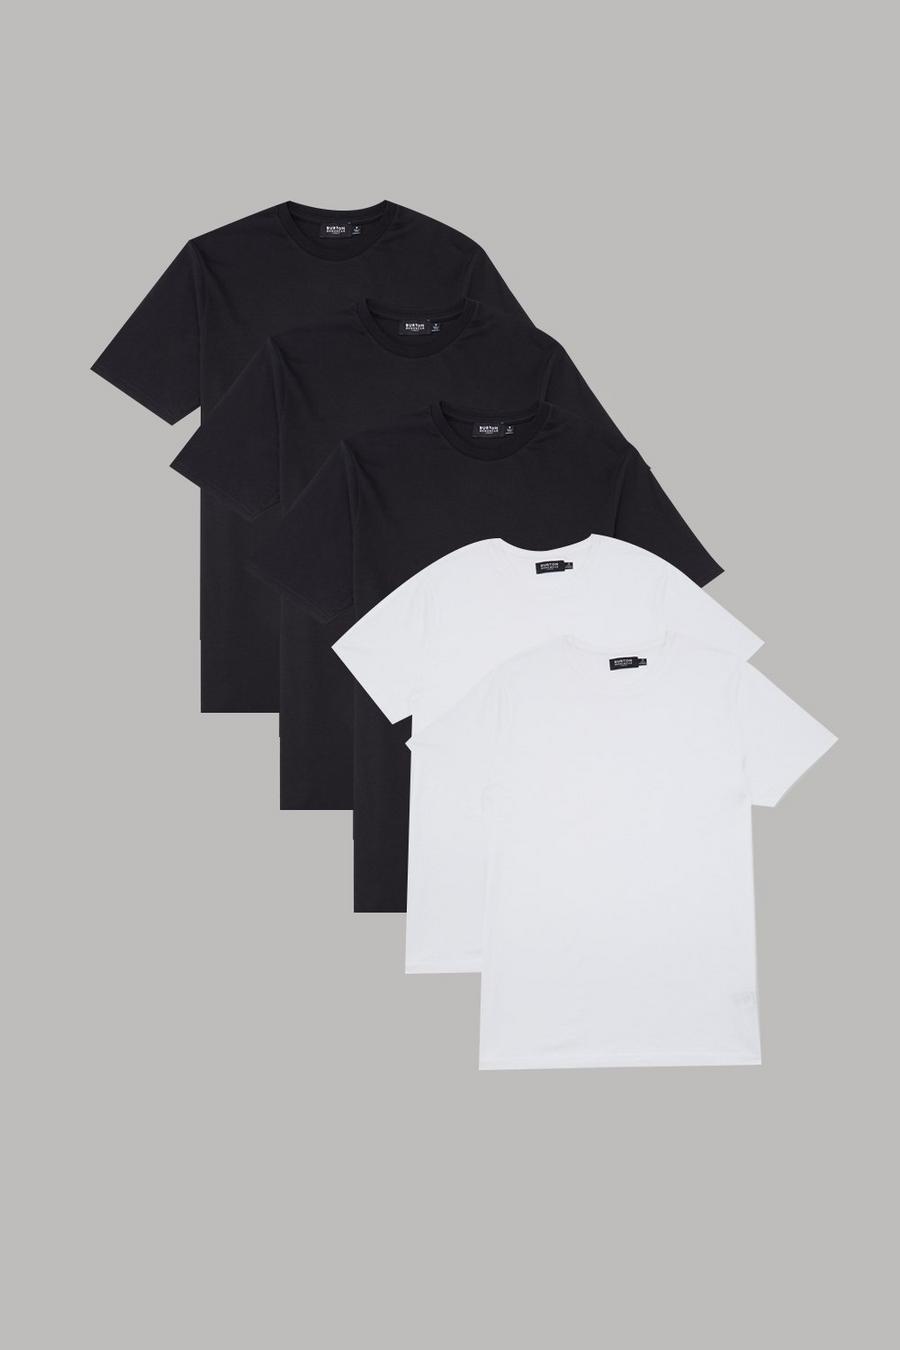 Black and White Slim Fit 5 Pack T-Shirt